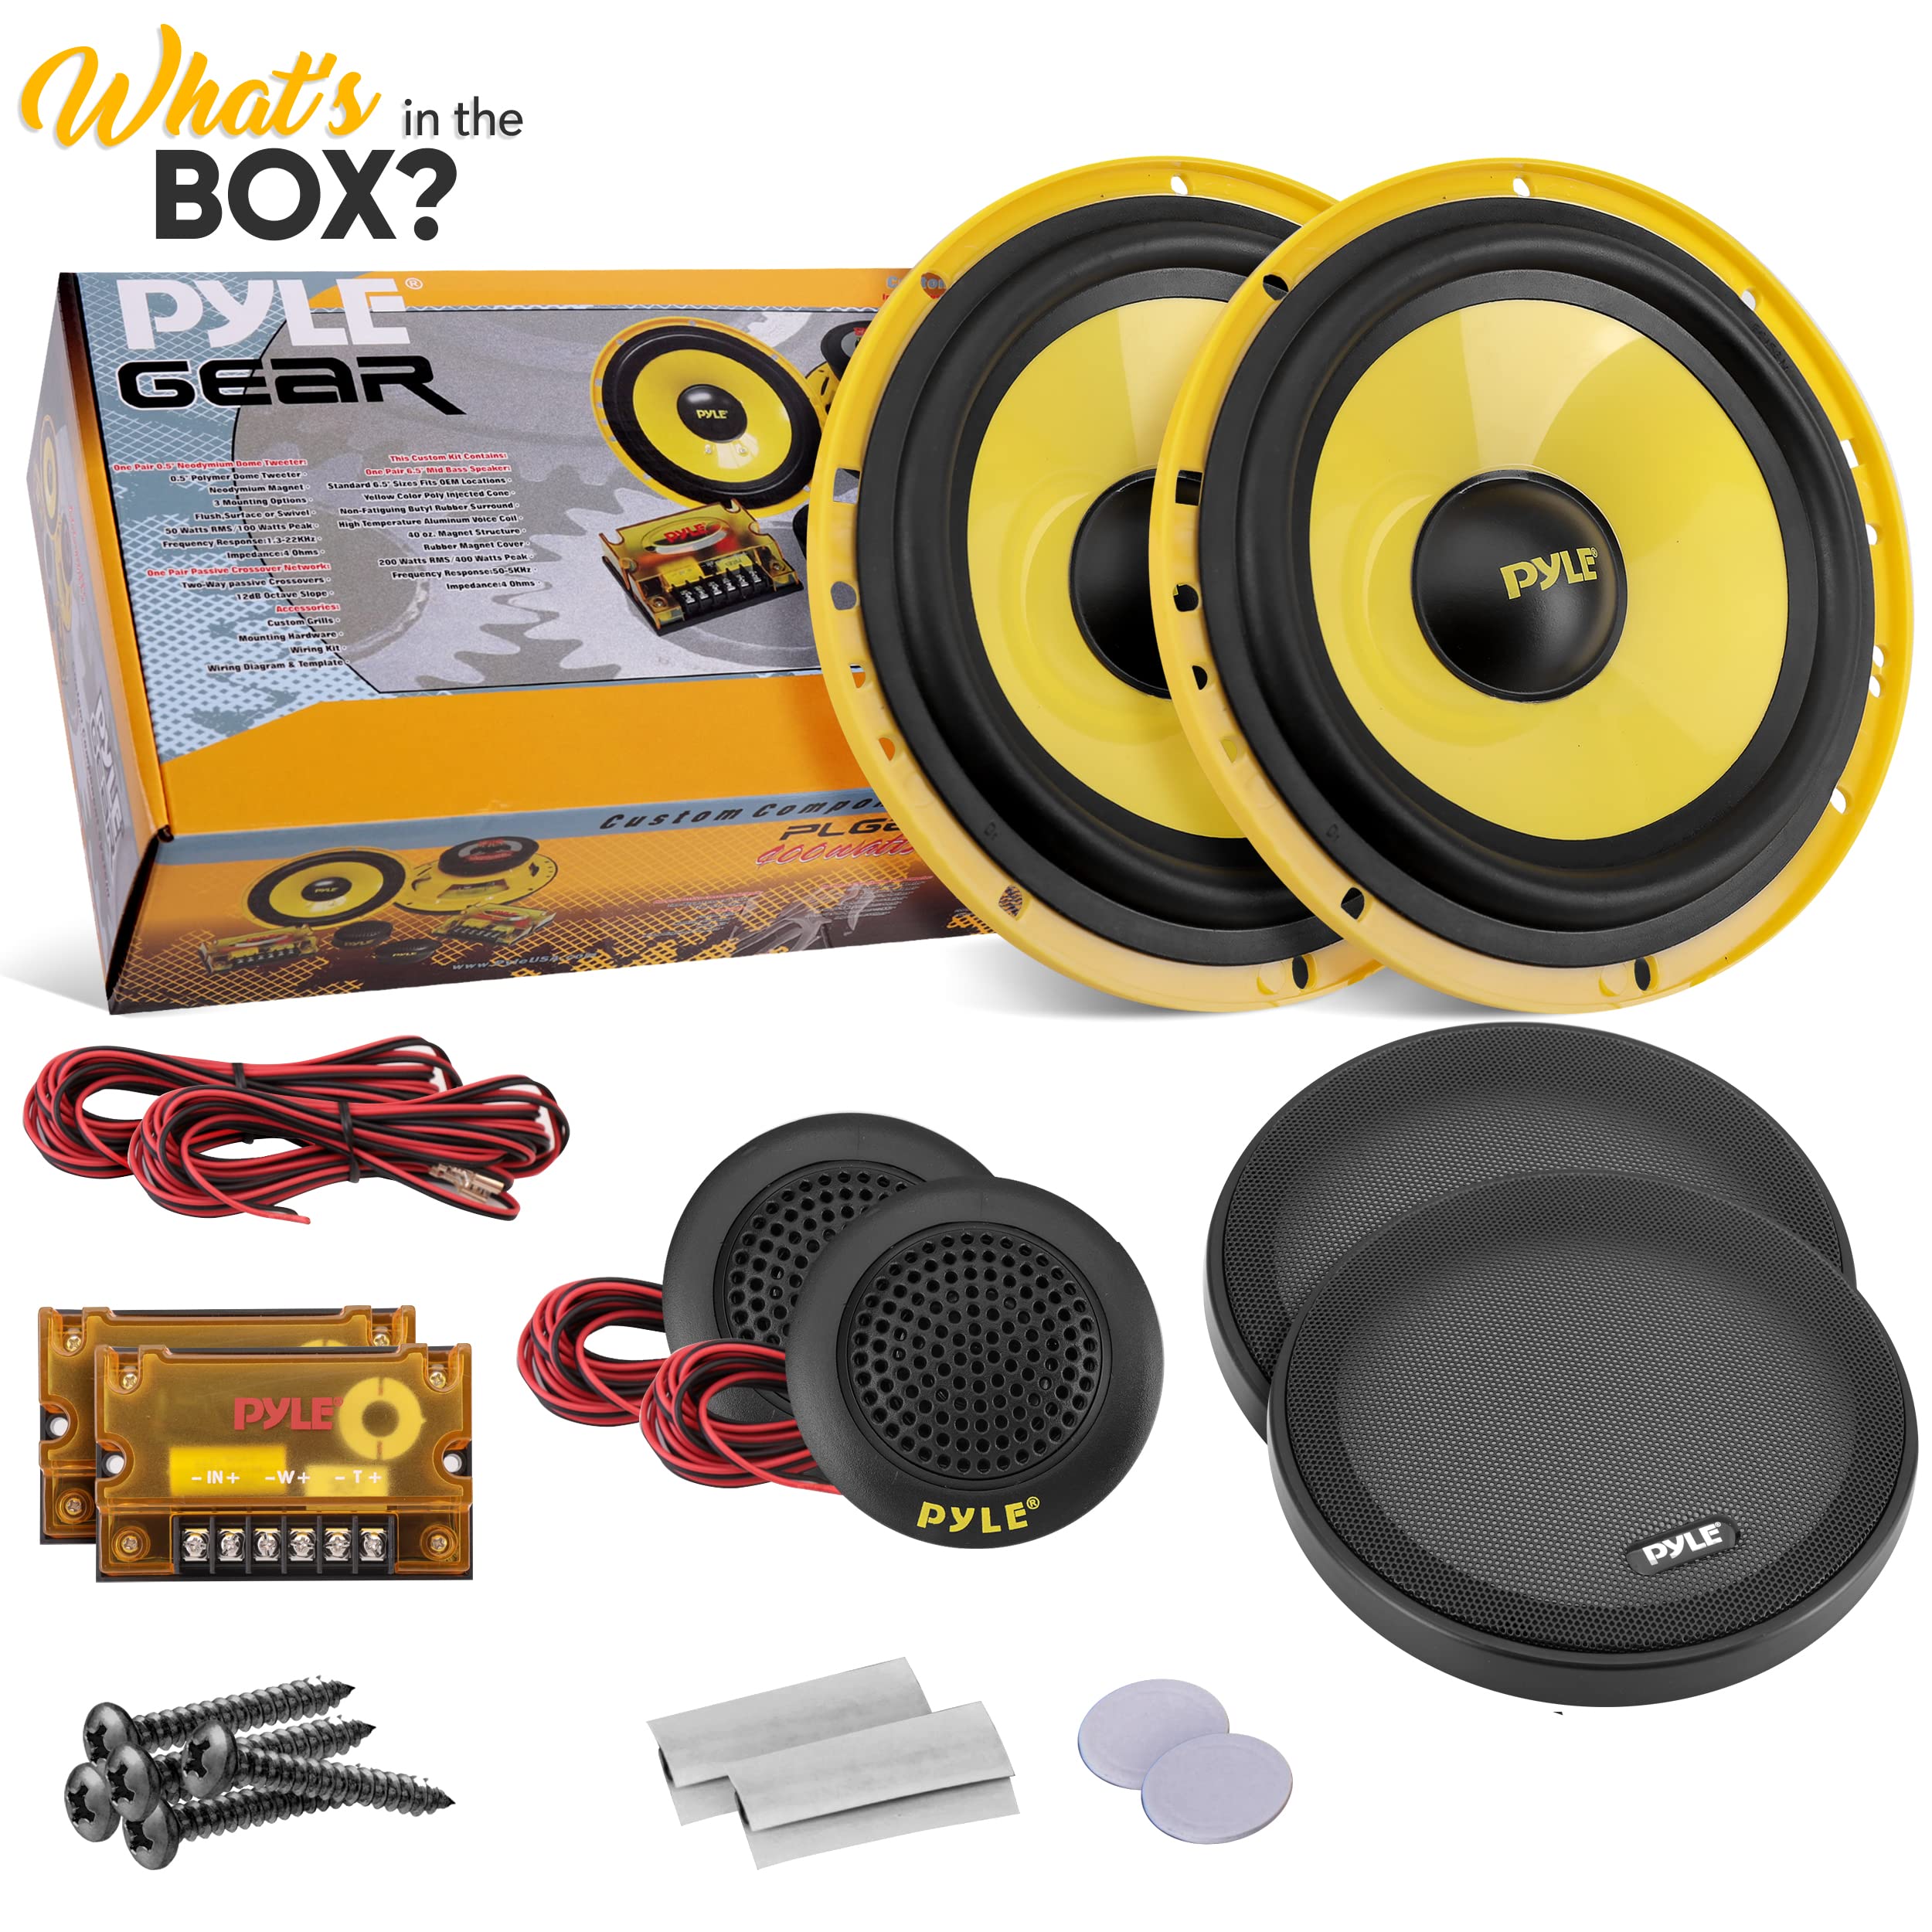 2Way Custom Component Speaker System - 6.5” 400 Watt Component with Electroplated Plastic Basket, Butyl Rubber Surround & 40Oz Magnet Structure - Wire Installation Hardware Set Included - Pyle PLG6C,Yellow